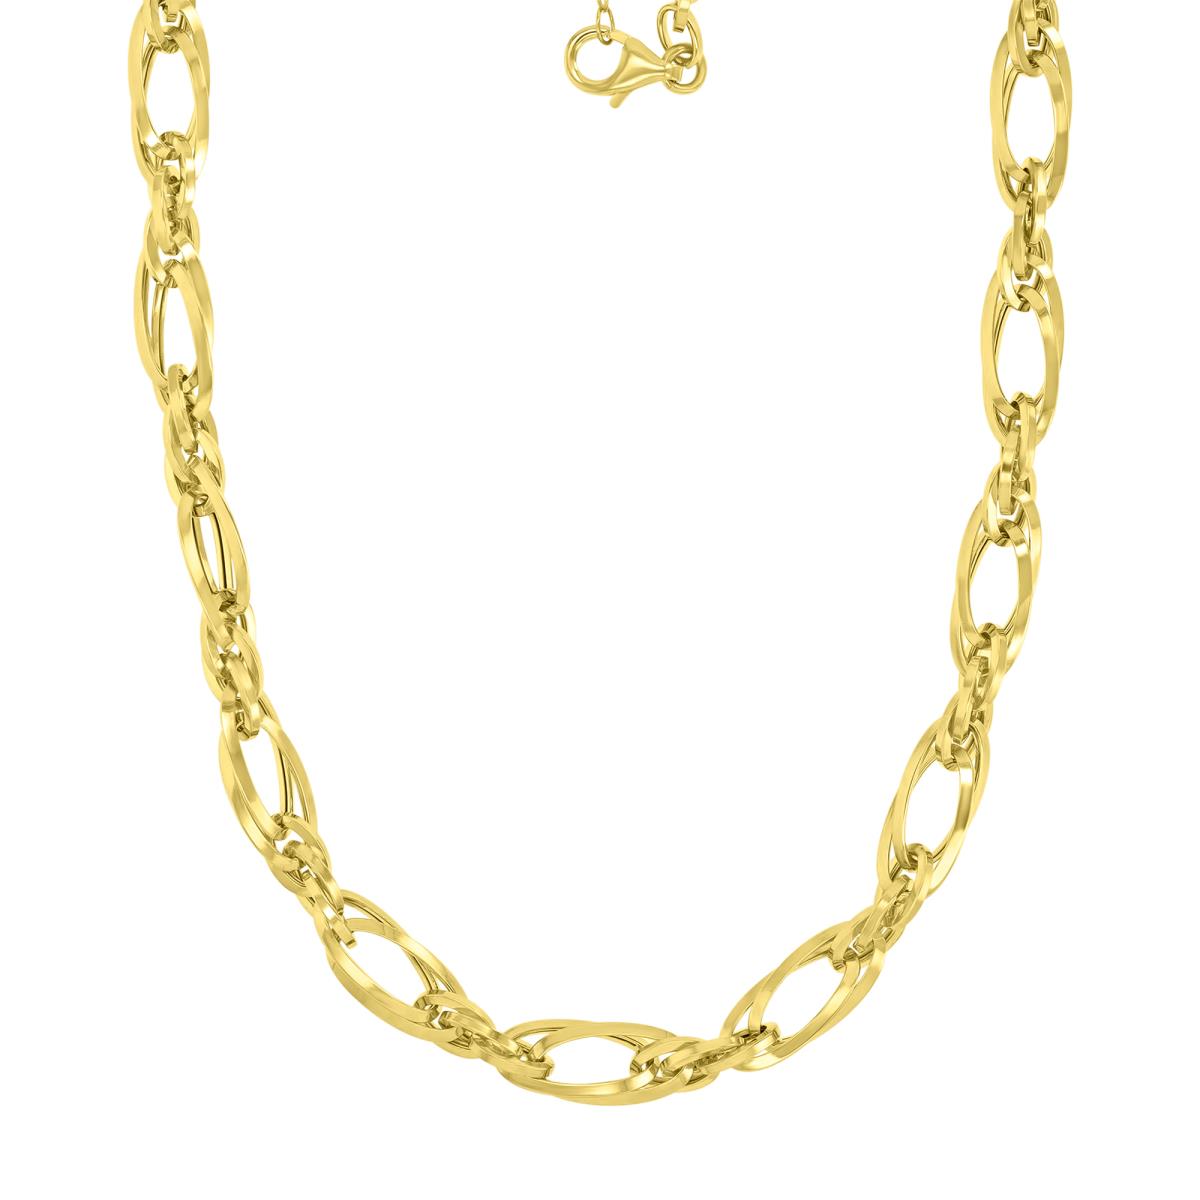 18K Yellow Gold 7mm Squared Wire Triangular Rope Chain 18" Necklace